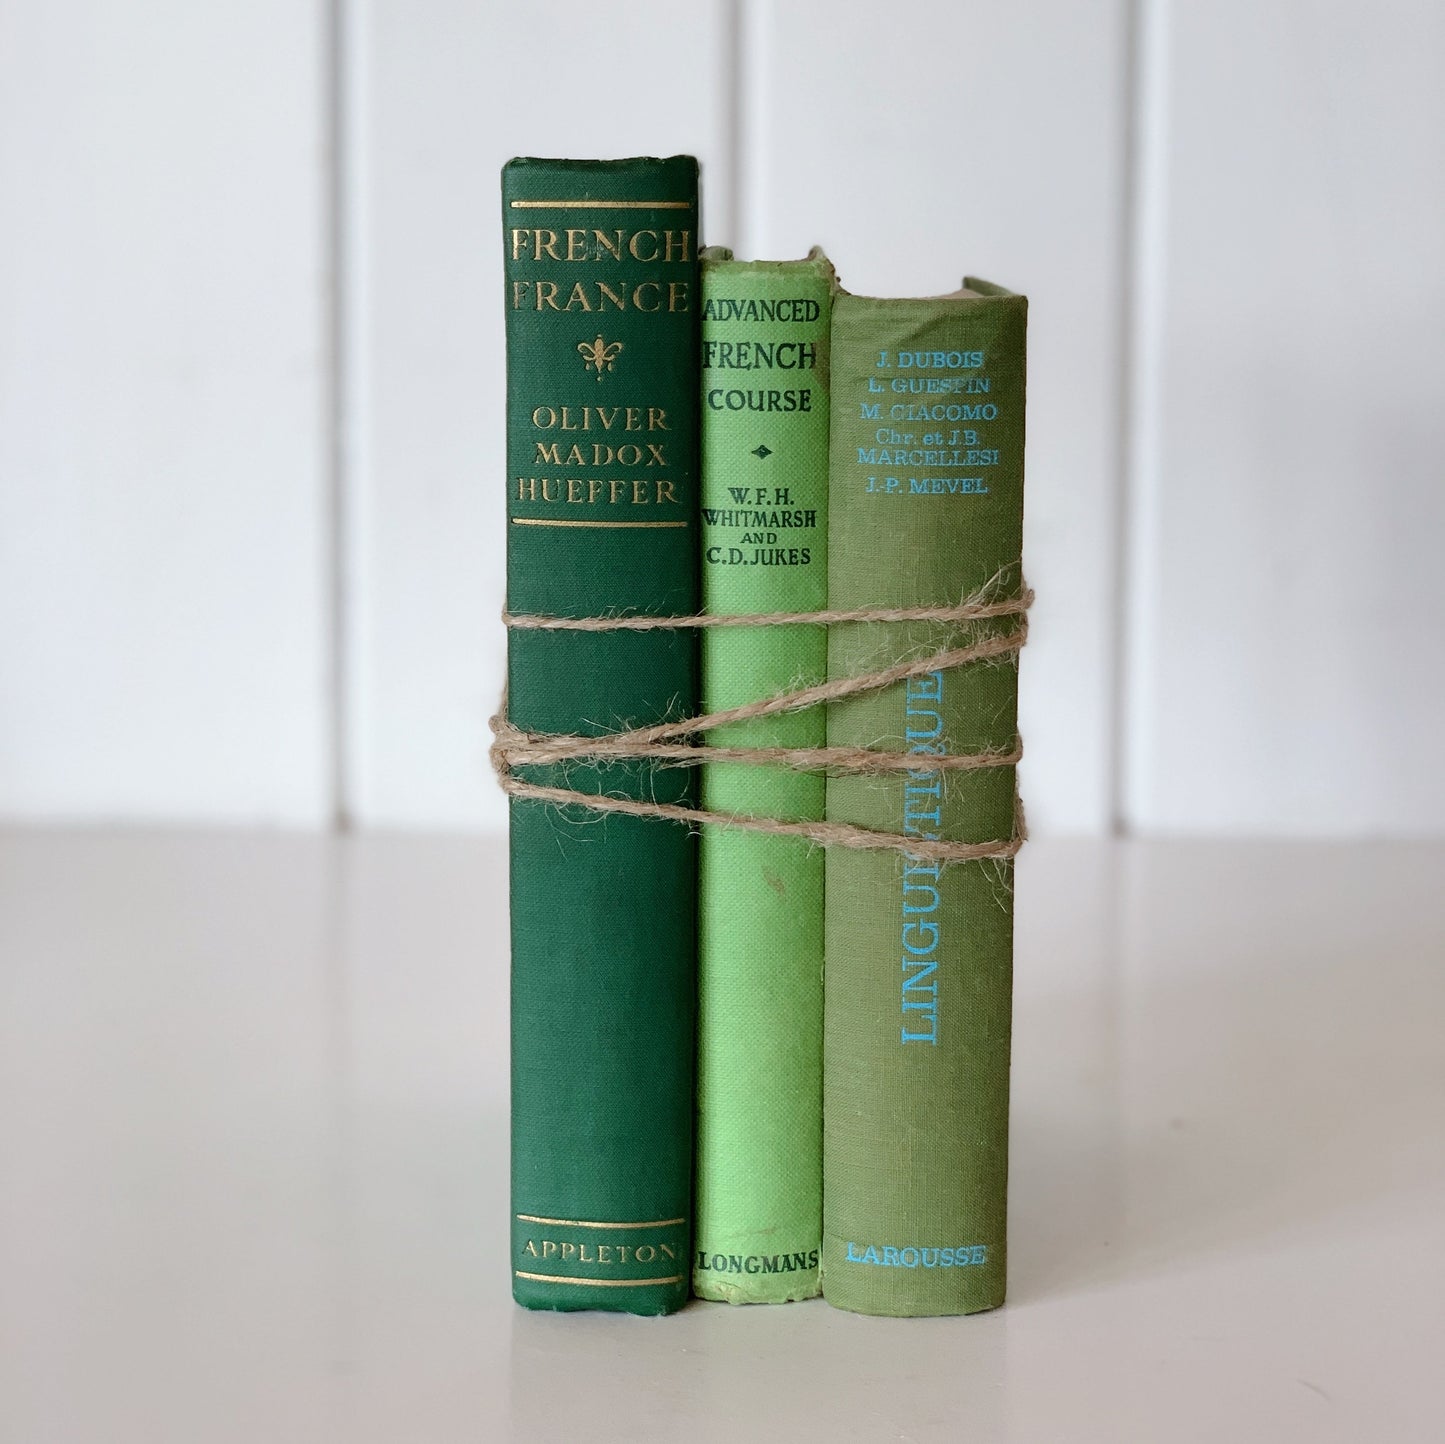 Vintage Green French Books, French School Books, French Country Shabby Chic Decor